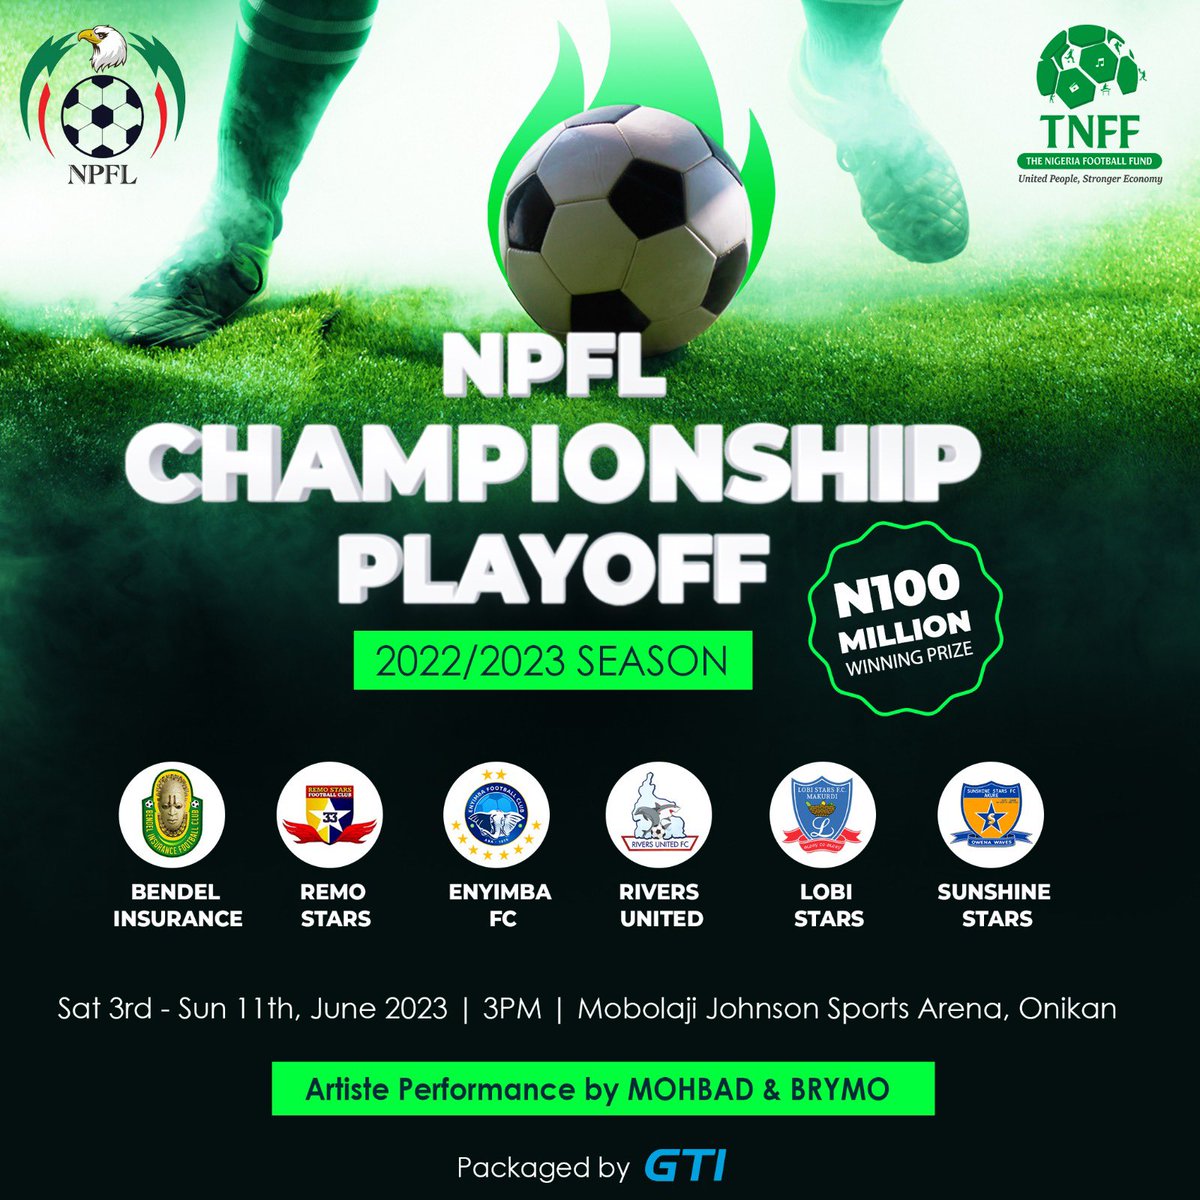 NPFL Super 6 Championship:

- League winner takes home N100 million.

- Continental spots also at stake.

Opening game: Enyimba vs Remo Stars, game kicks off 2pm today at the Mobolaji Johnson Arena.

#NPFL23ChampionshipPlayoff